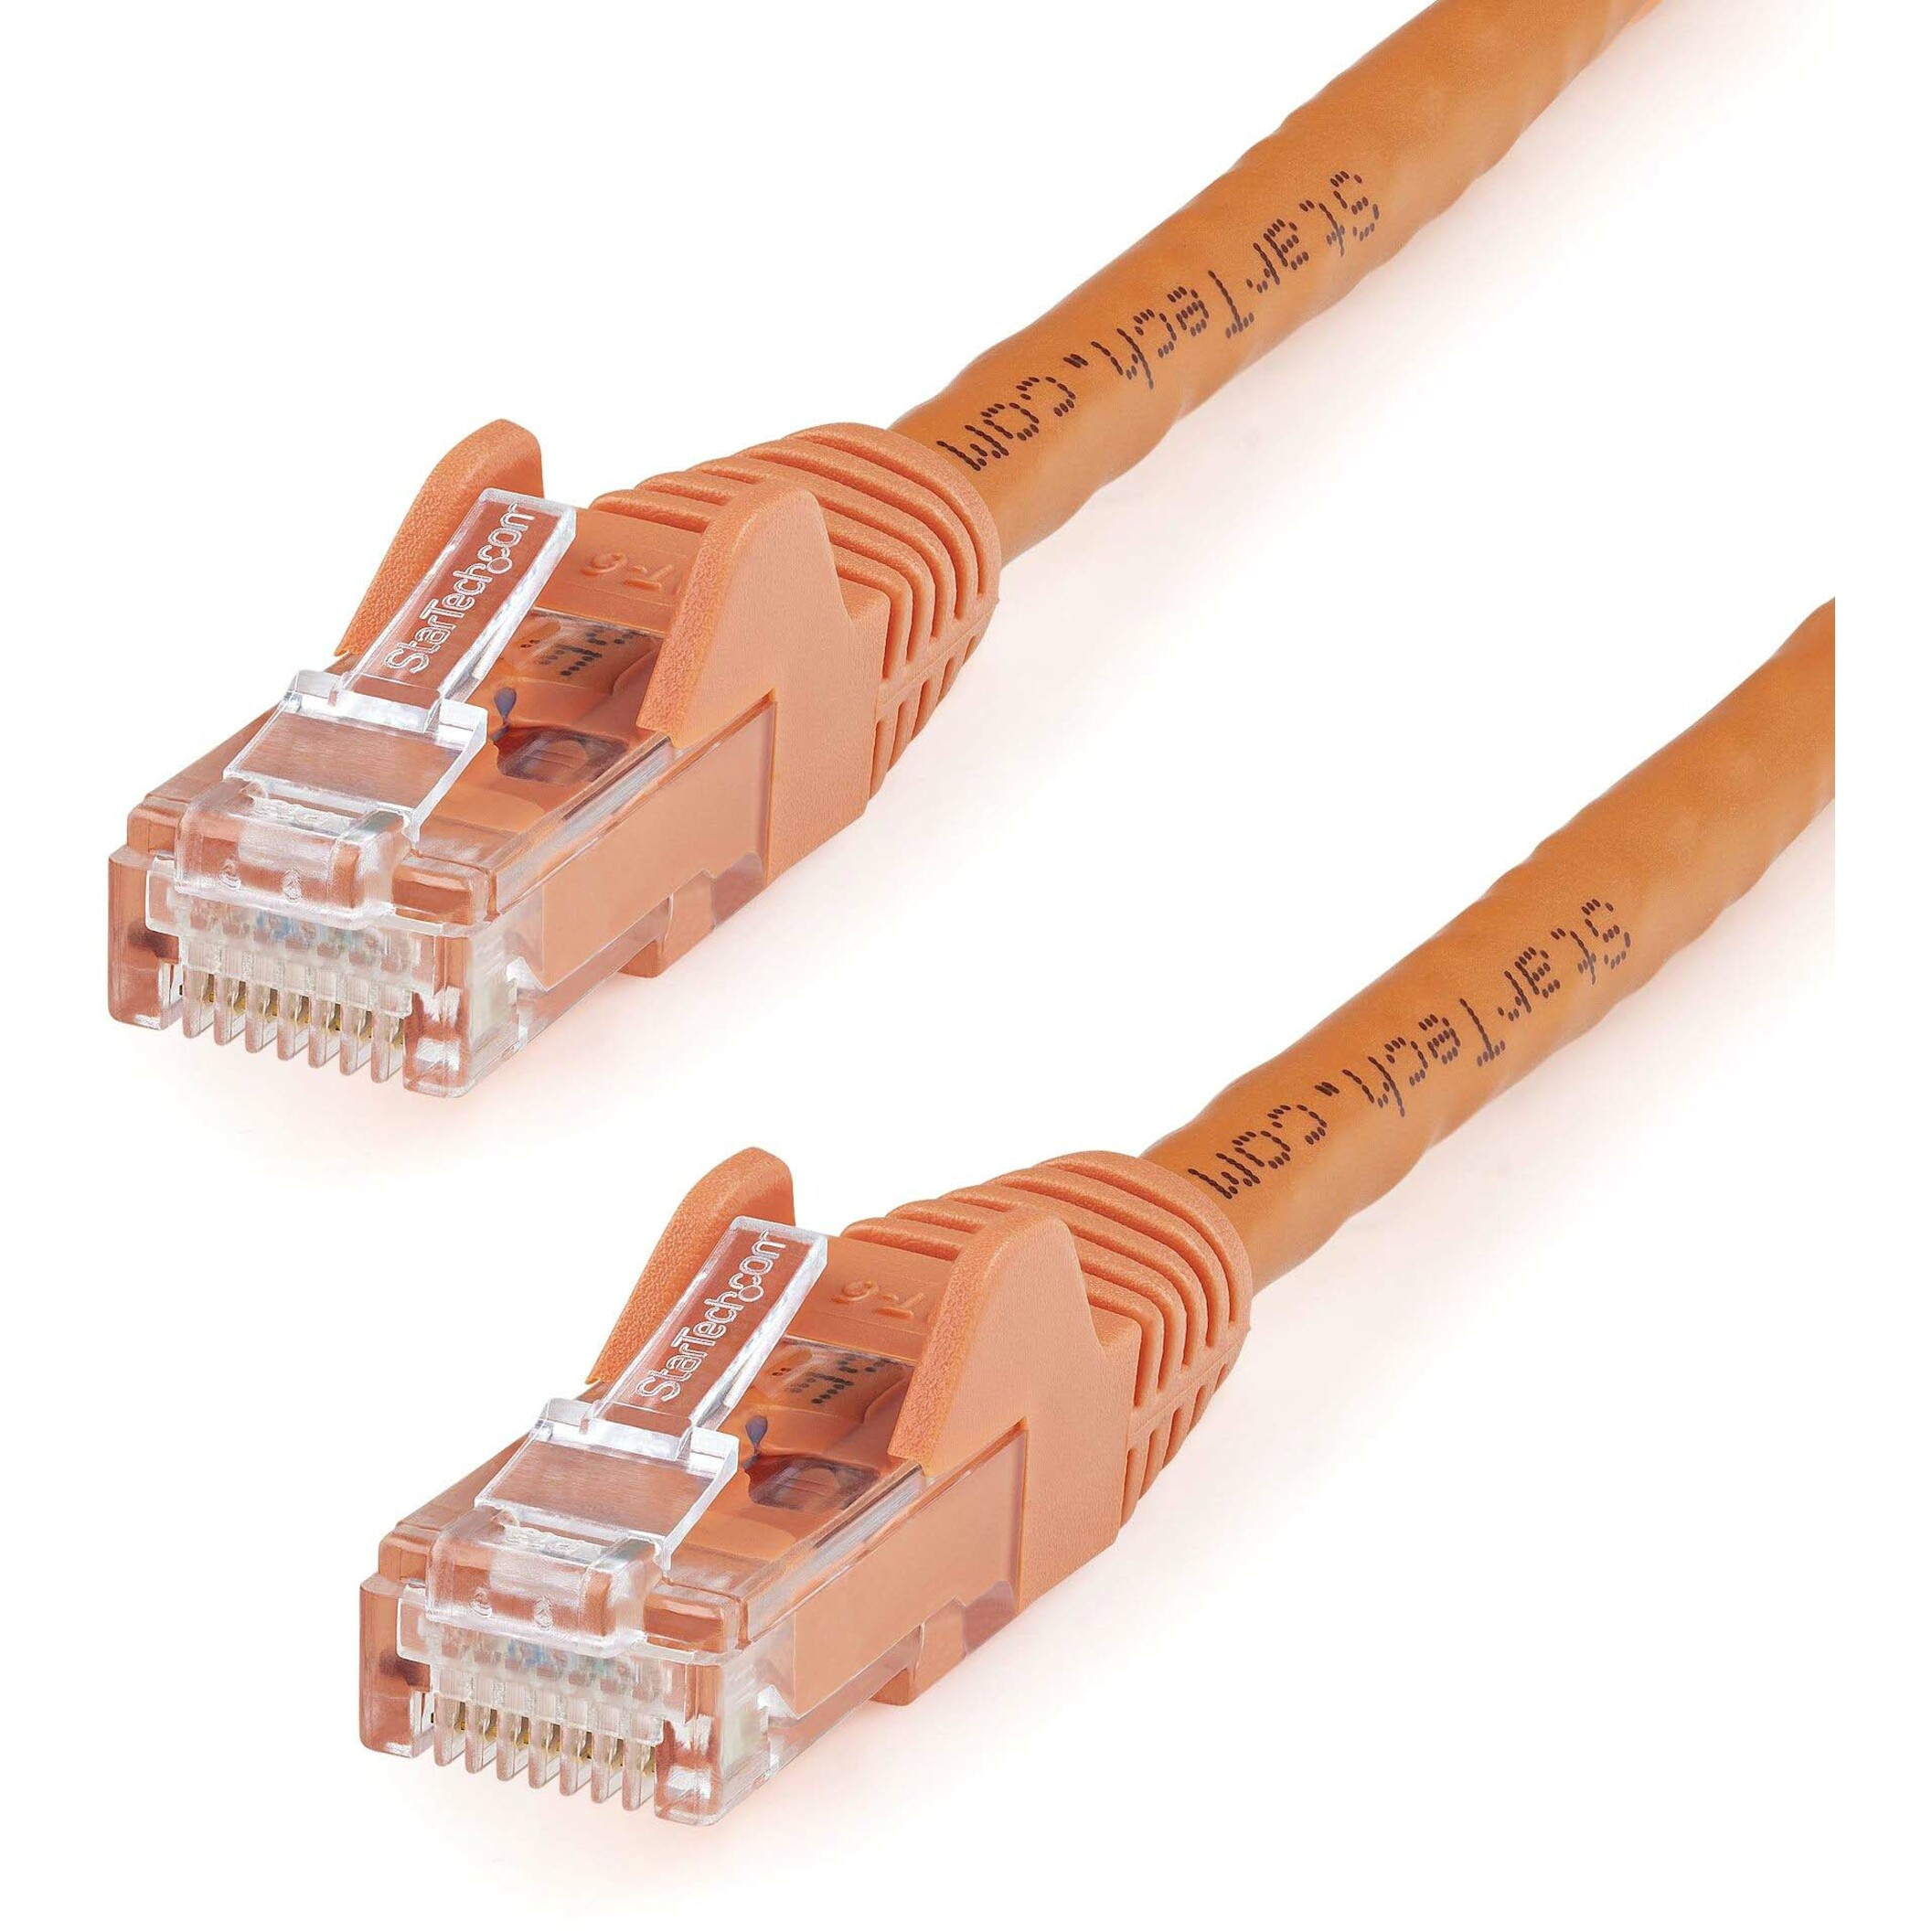 Startech .com 4ft CAT6 Ethernet CableOrange Snagless Gigabit100W PoE UTP 650MHz Category 6 Patch Cord UL Certified Wiring/TIA4ft Oran… N6PATCH4OR